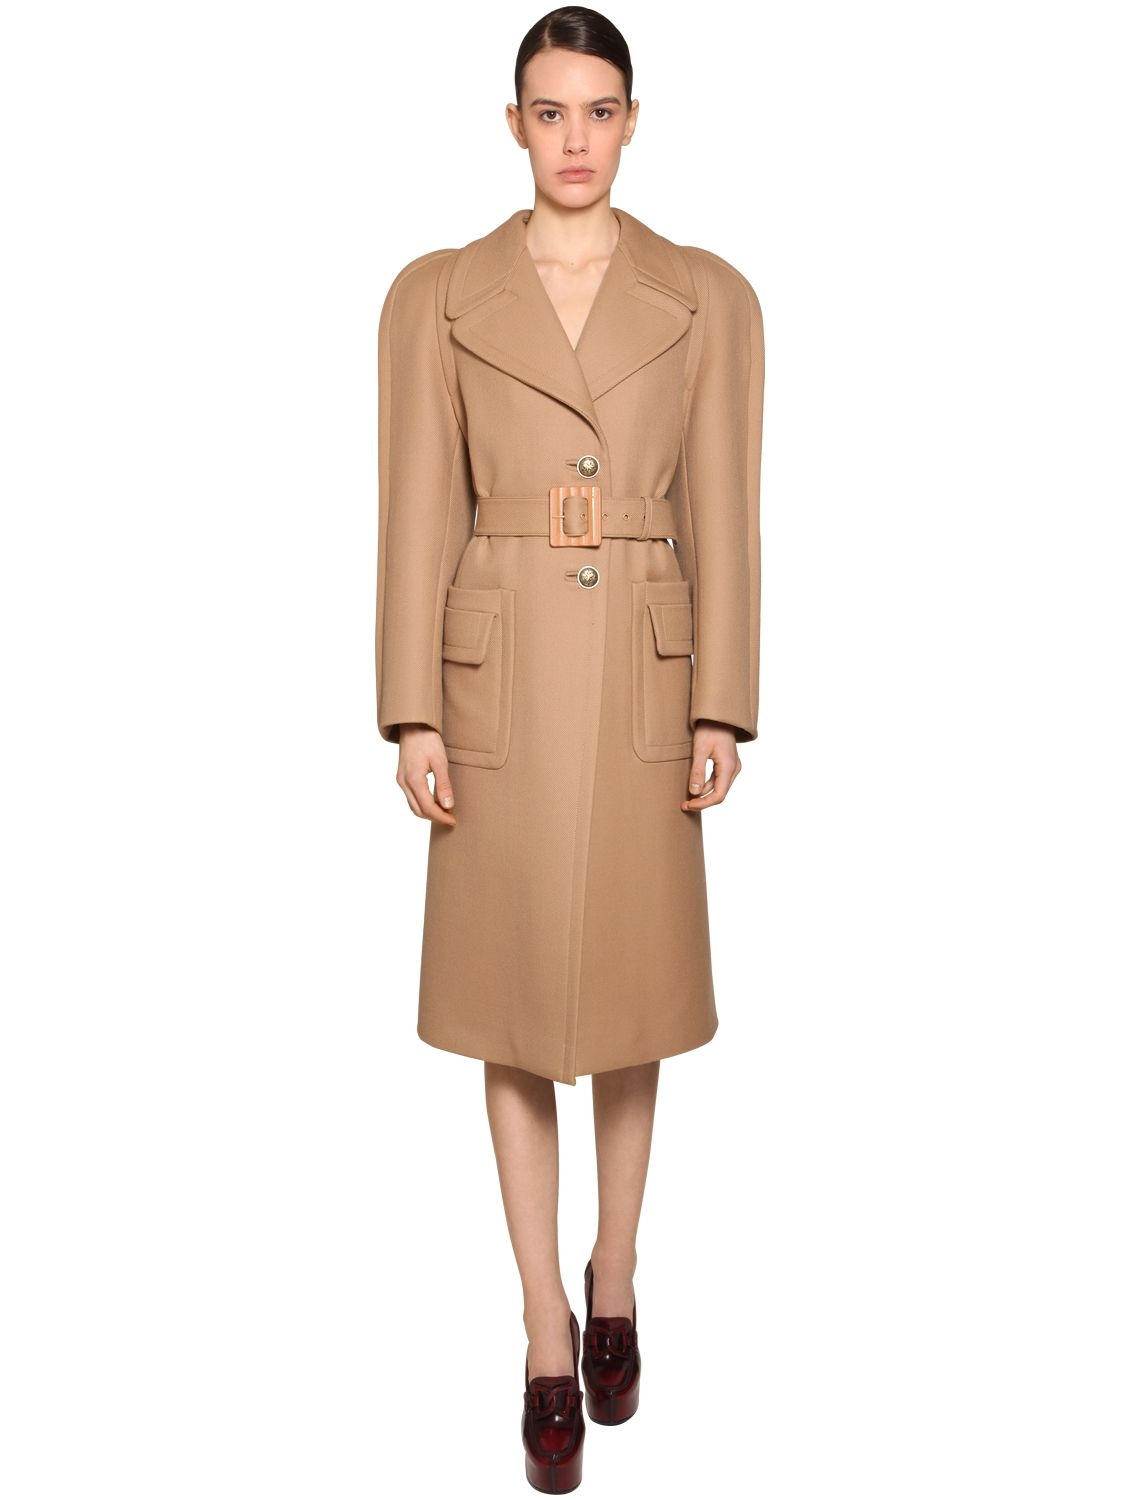 GIVENCHY ROUND SHOULDER DOUBLE WOOL COAT,70ID19003-MJGW0